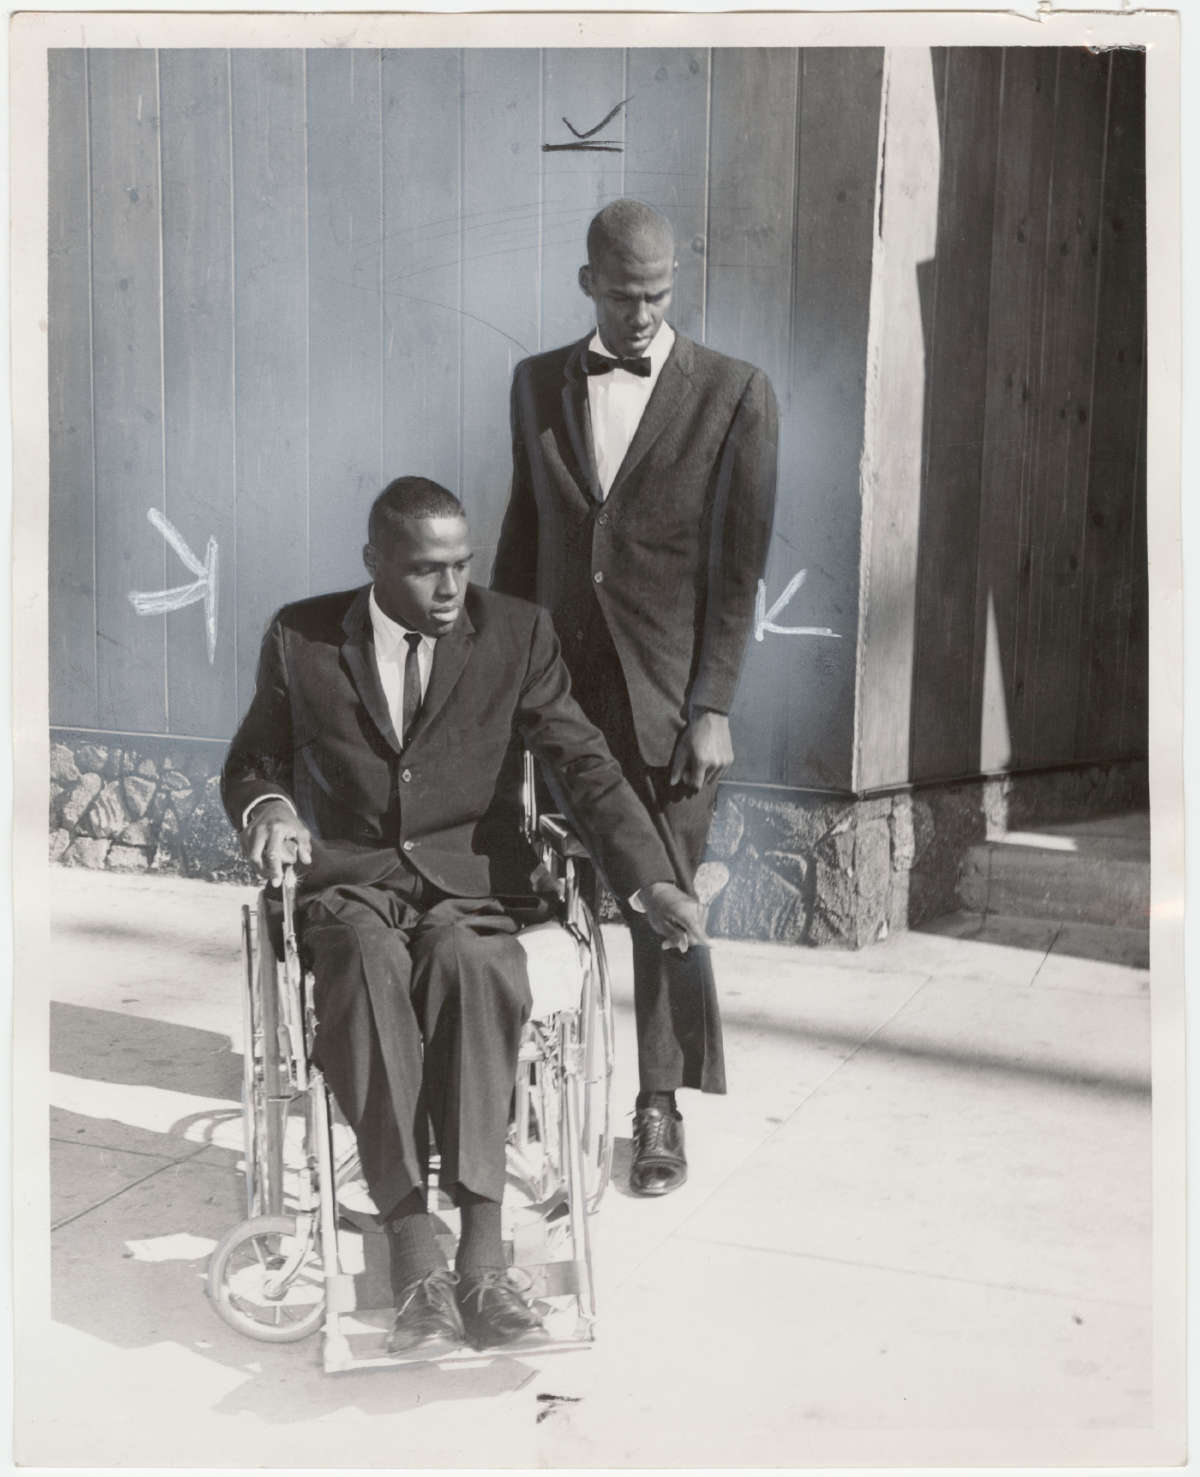 William Rogers, who experienced paralysis due to police bullets, appears with his brother Robert.